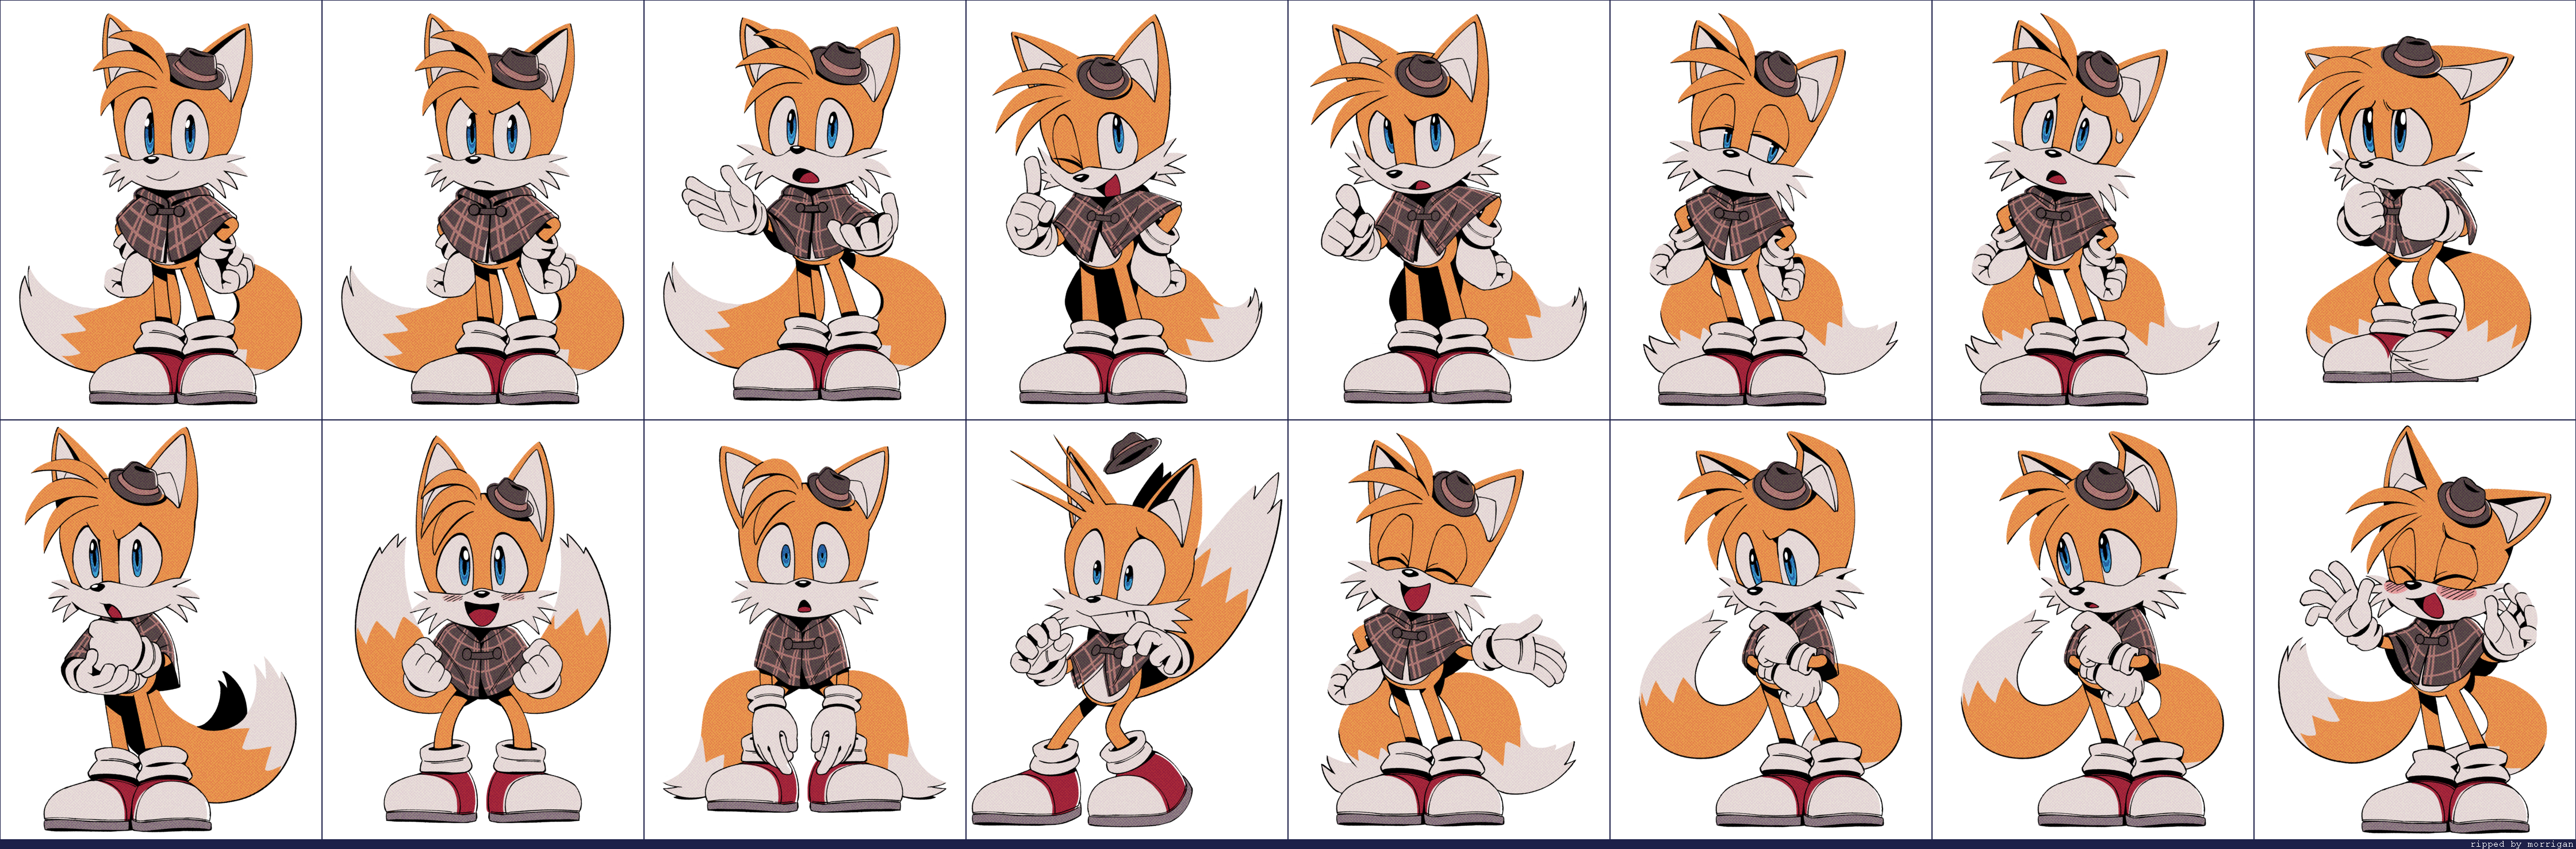 The Murder of Sonic the Hedgehog - Miles "Tails" Prower